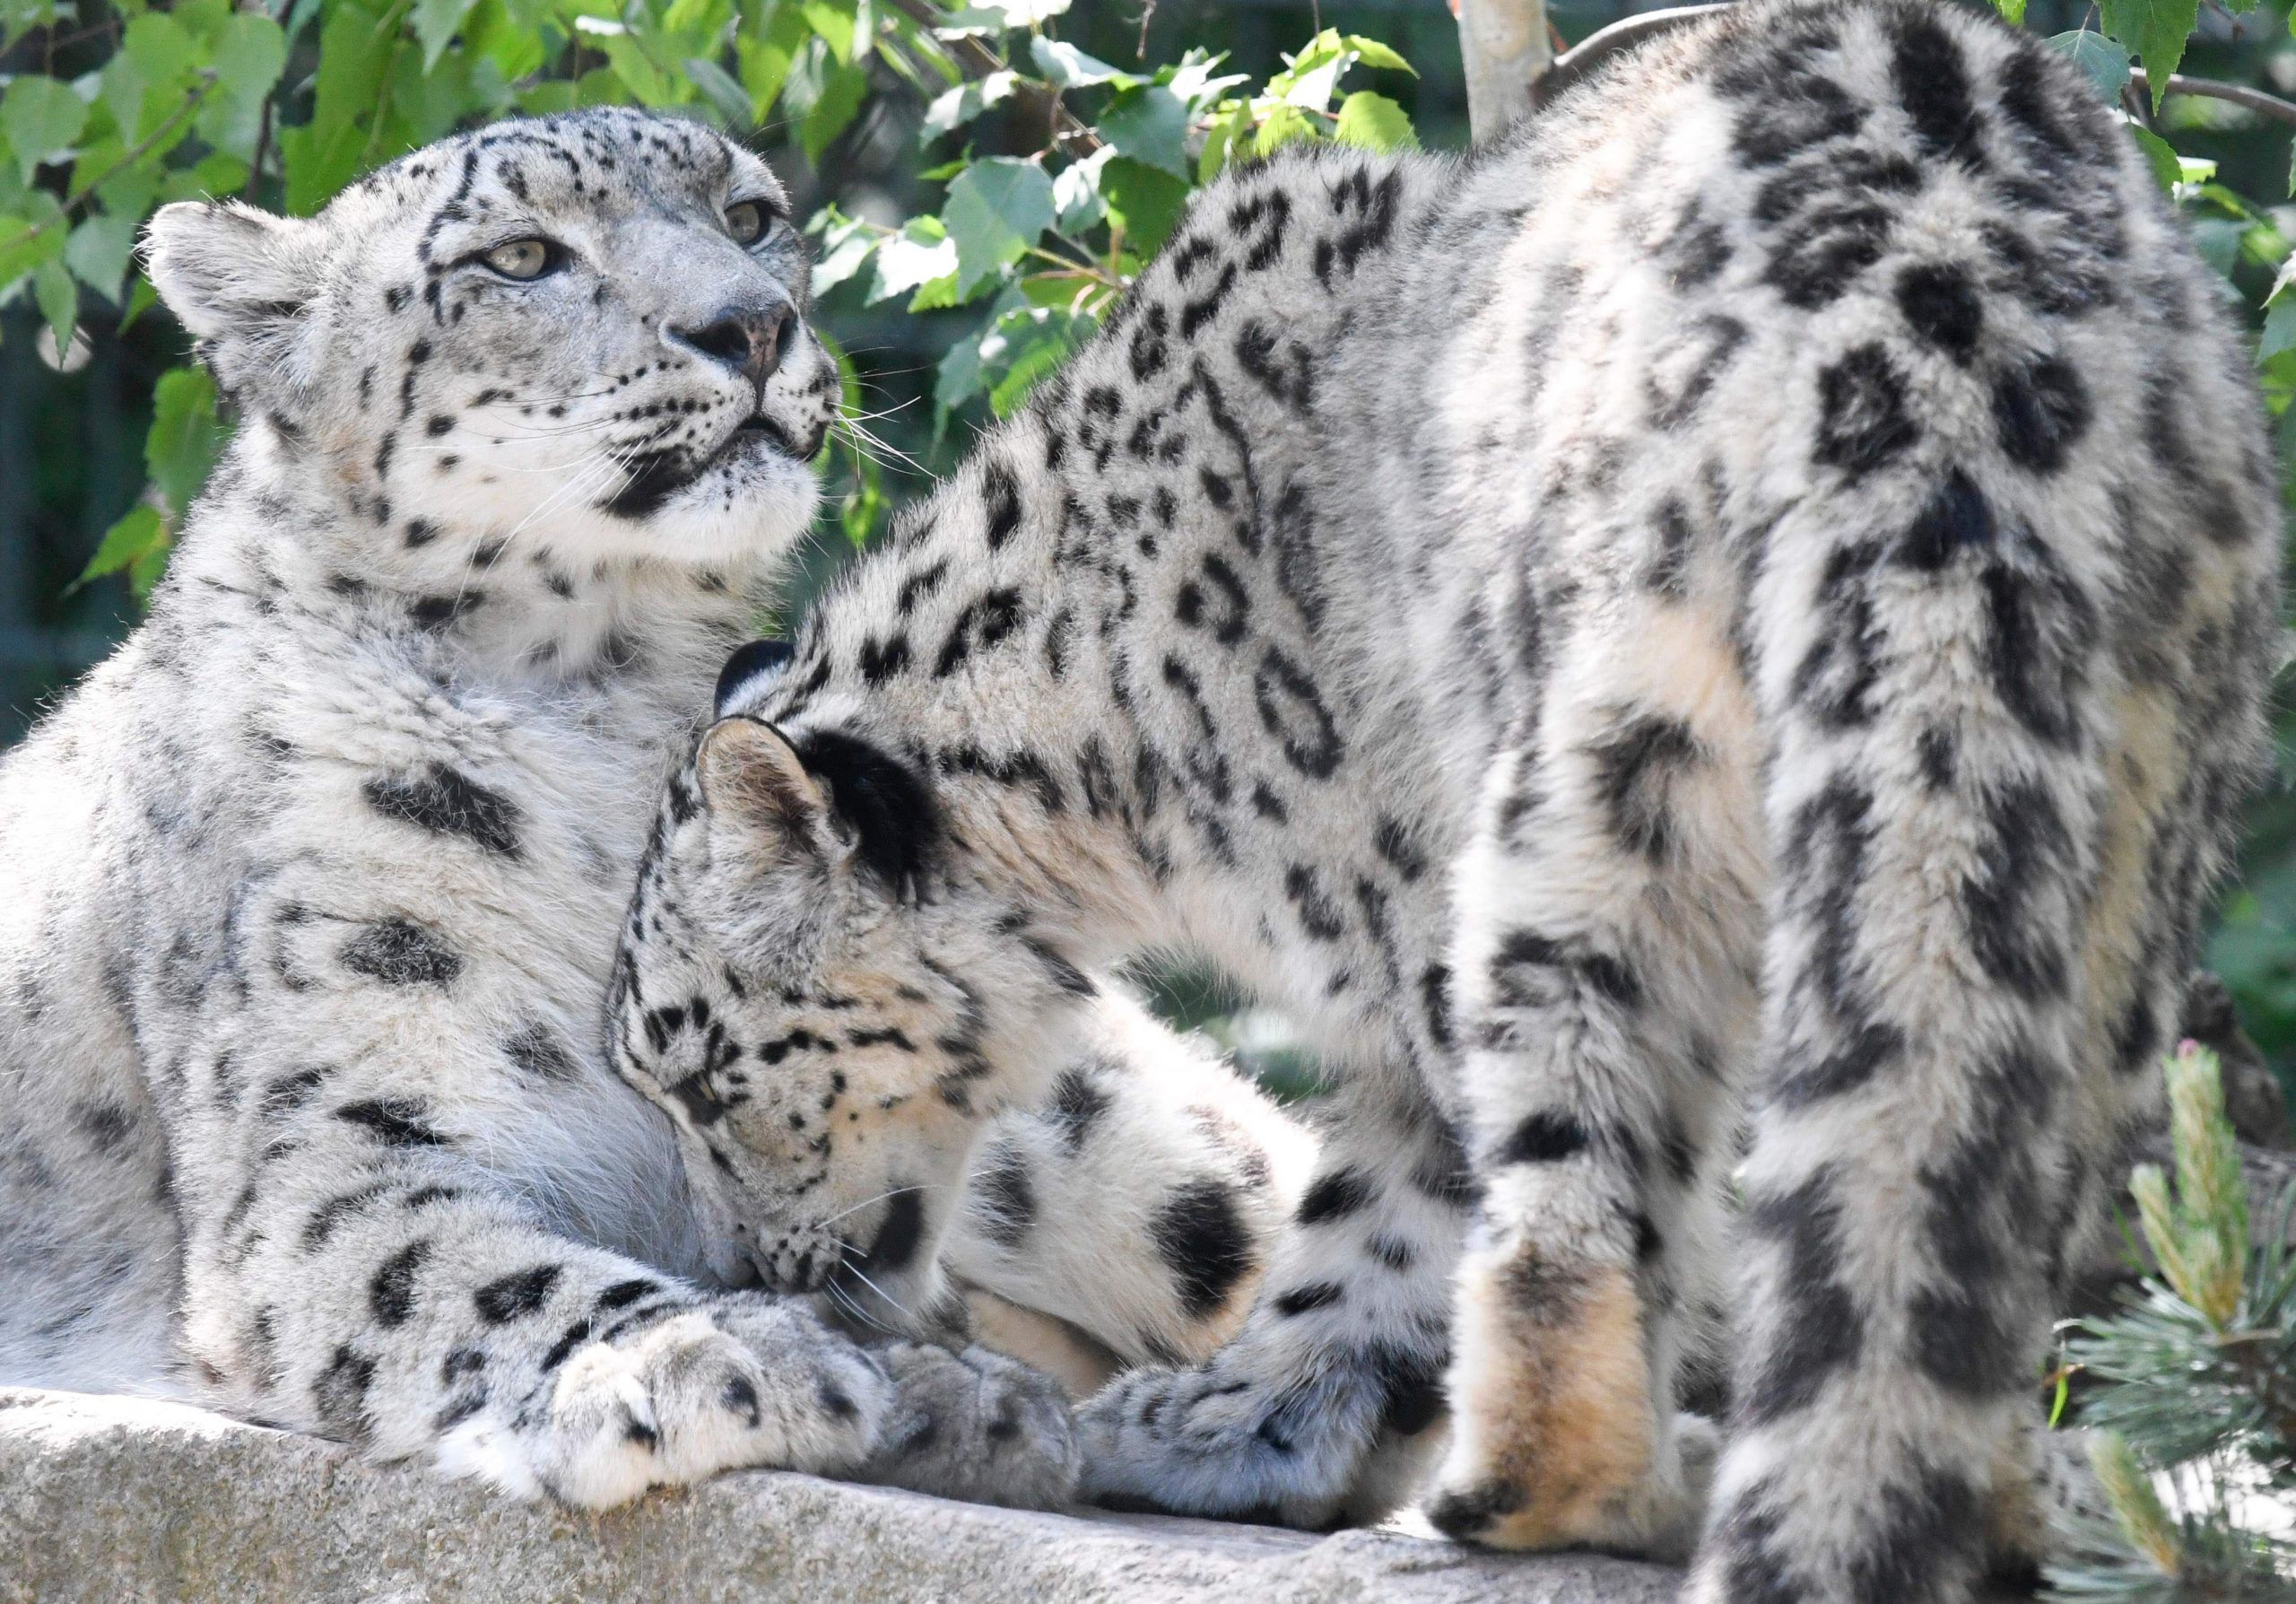 Snow leopards are seen in their enclosure at Wilhelma botanical-zoological garden in Stuttgart, ten days after its reopening on May 20, 2020 amid the new coronavirus COVID-19 pandemic. (Photo by THOMAS KIENZLE / AFP) (Photo by THOMAS KIENZLE/AFP /AFP via Getty Images)